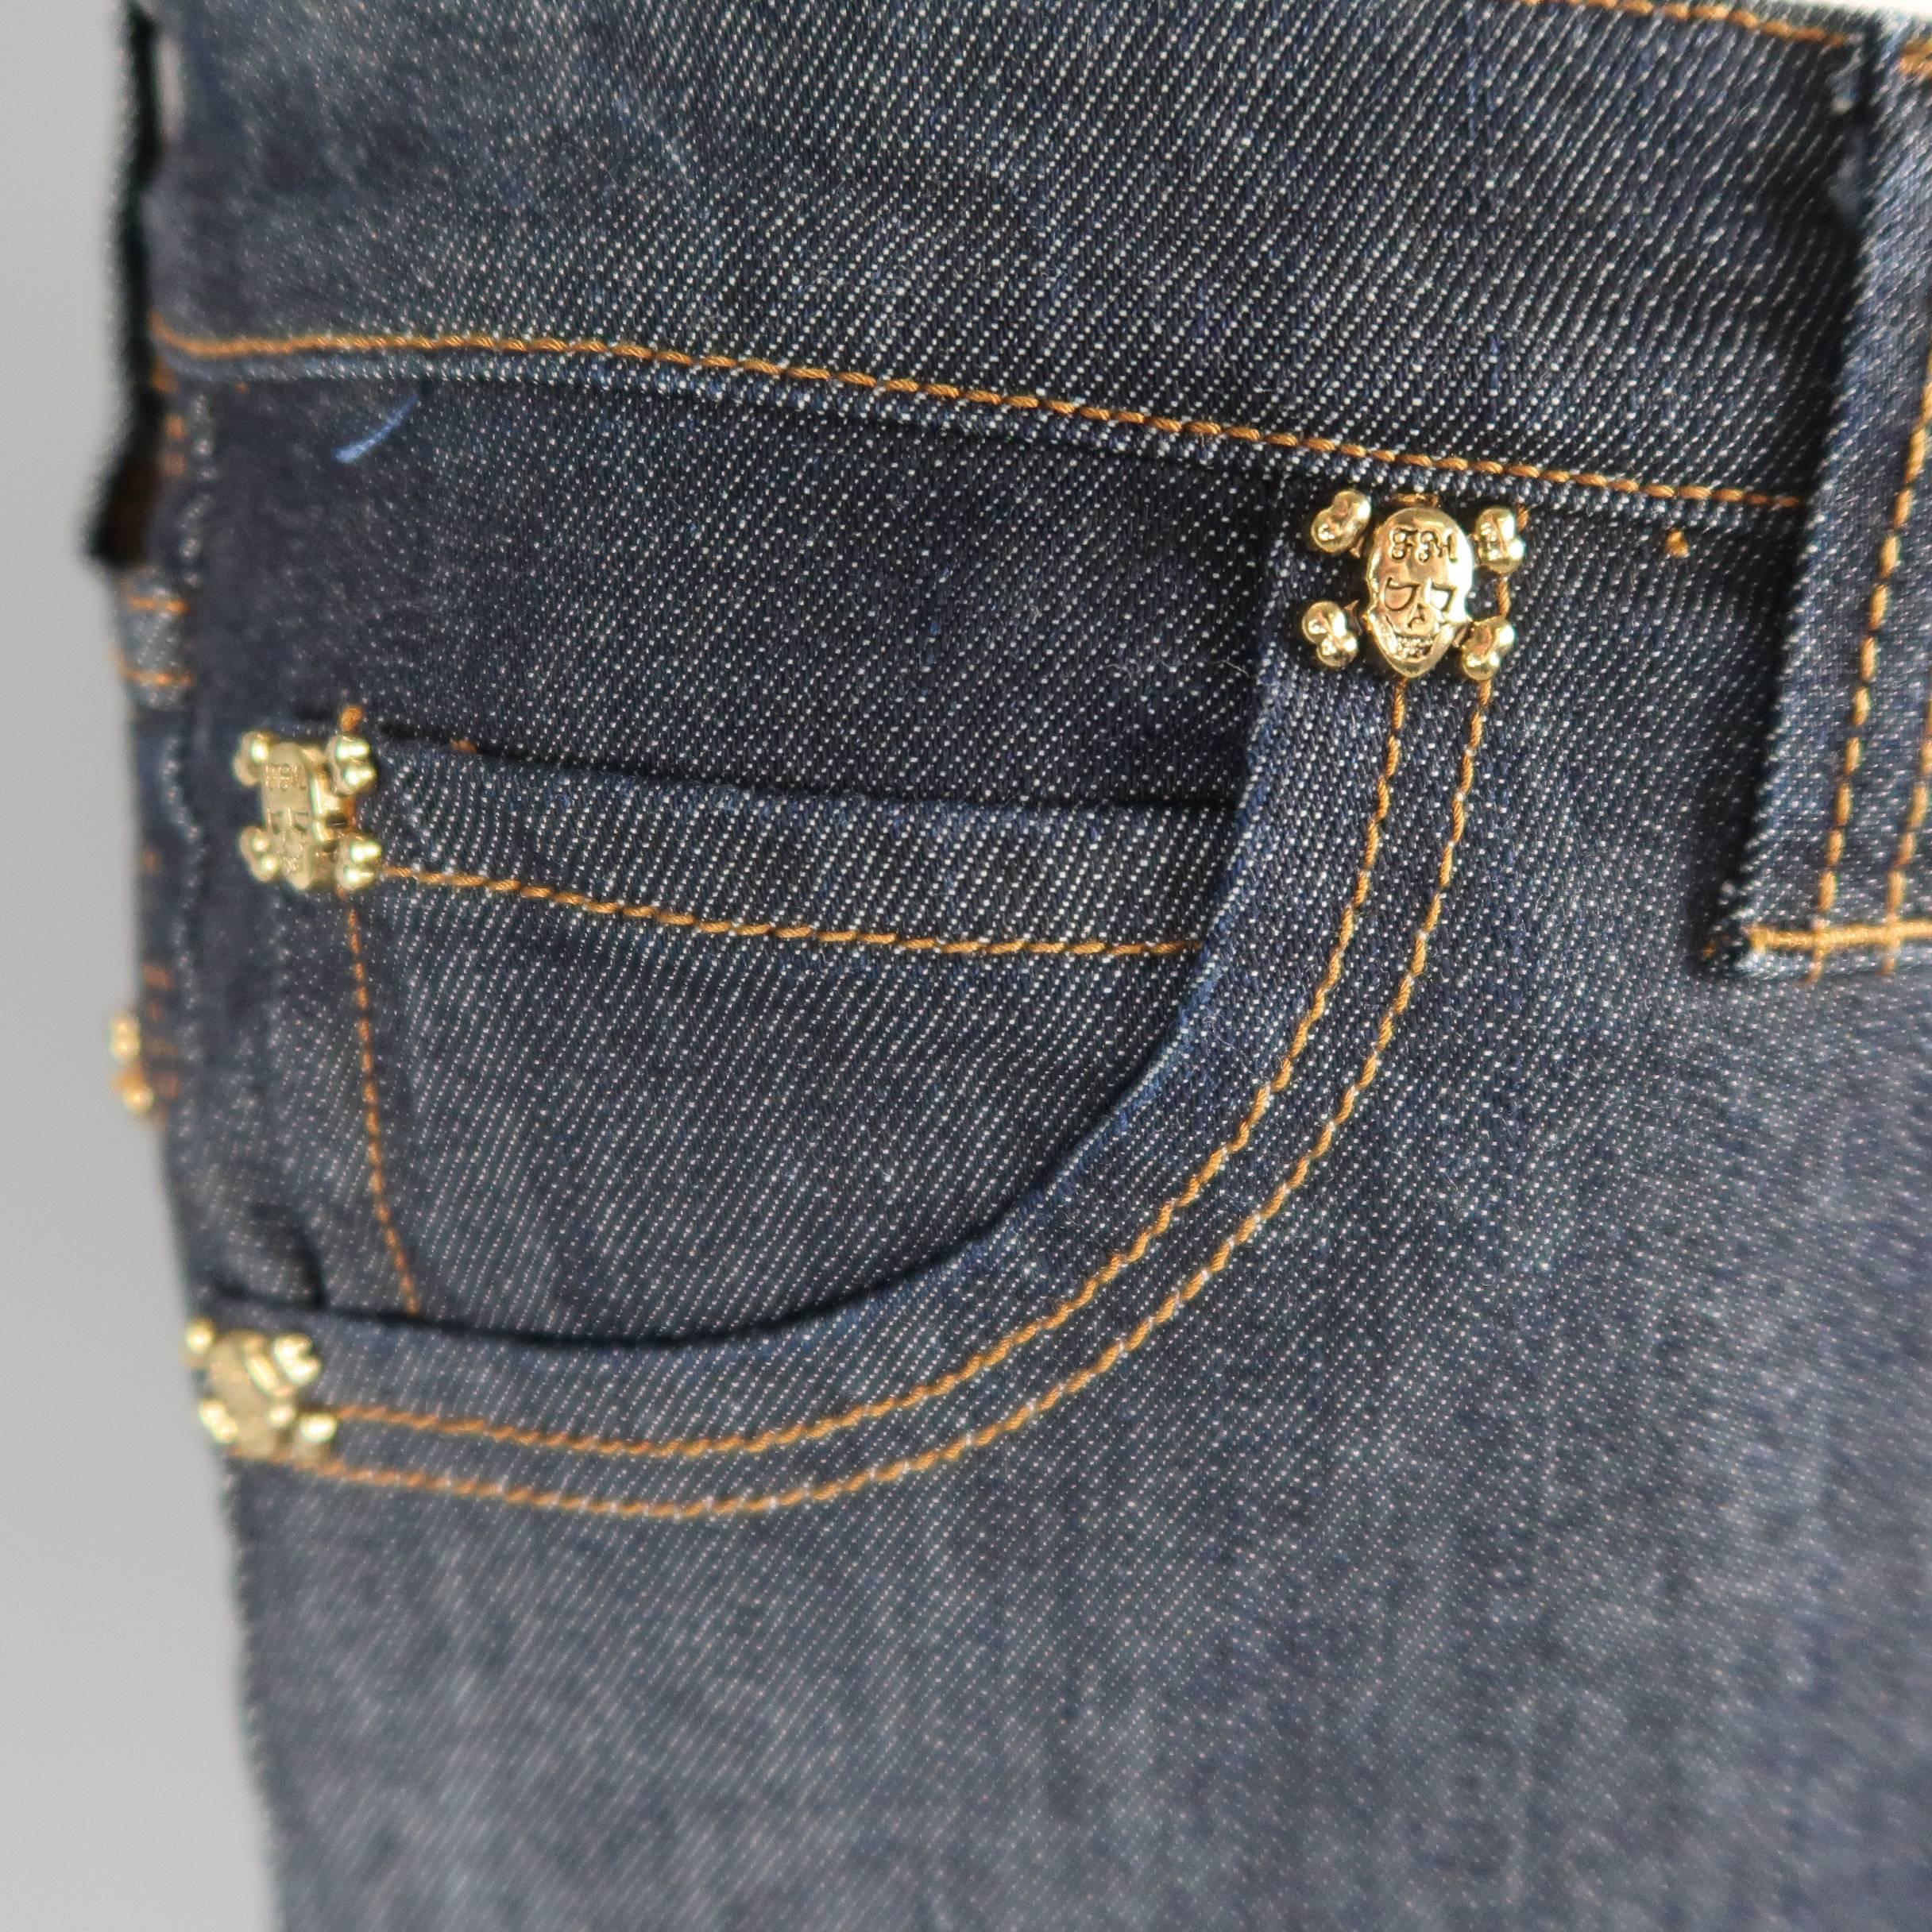 black levis with gold stitching